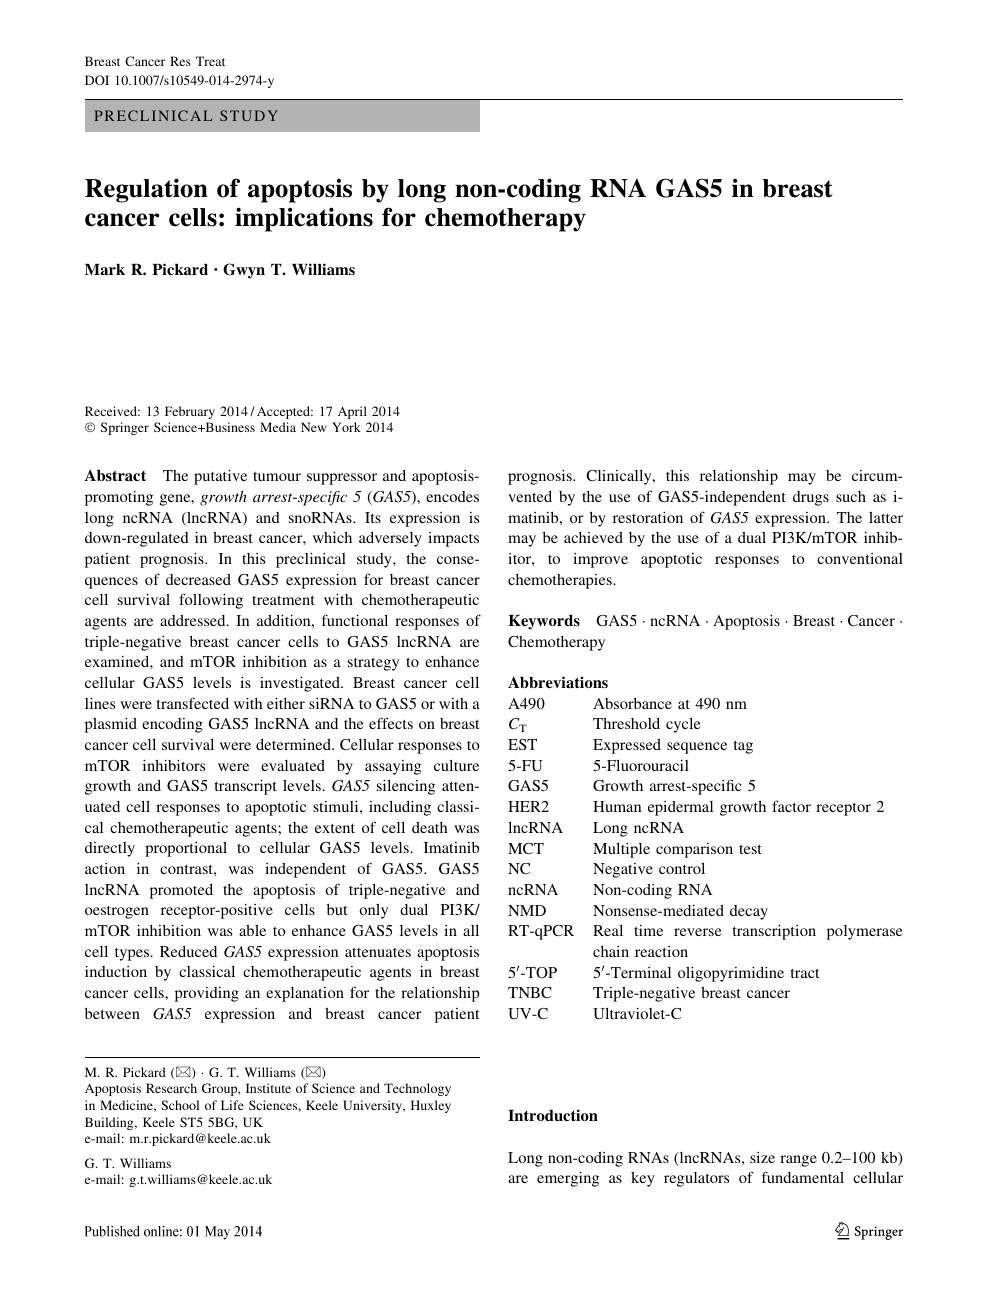 Regulation Of Apoptosis By Long Non Coding Rna Gas5 In Breast Cancer Cells Implications For Chemotherapy Topic Of Research Paper In Biological Sciences Download Scholarly Article Pdf And Read For Free On